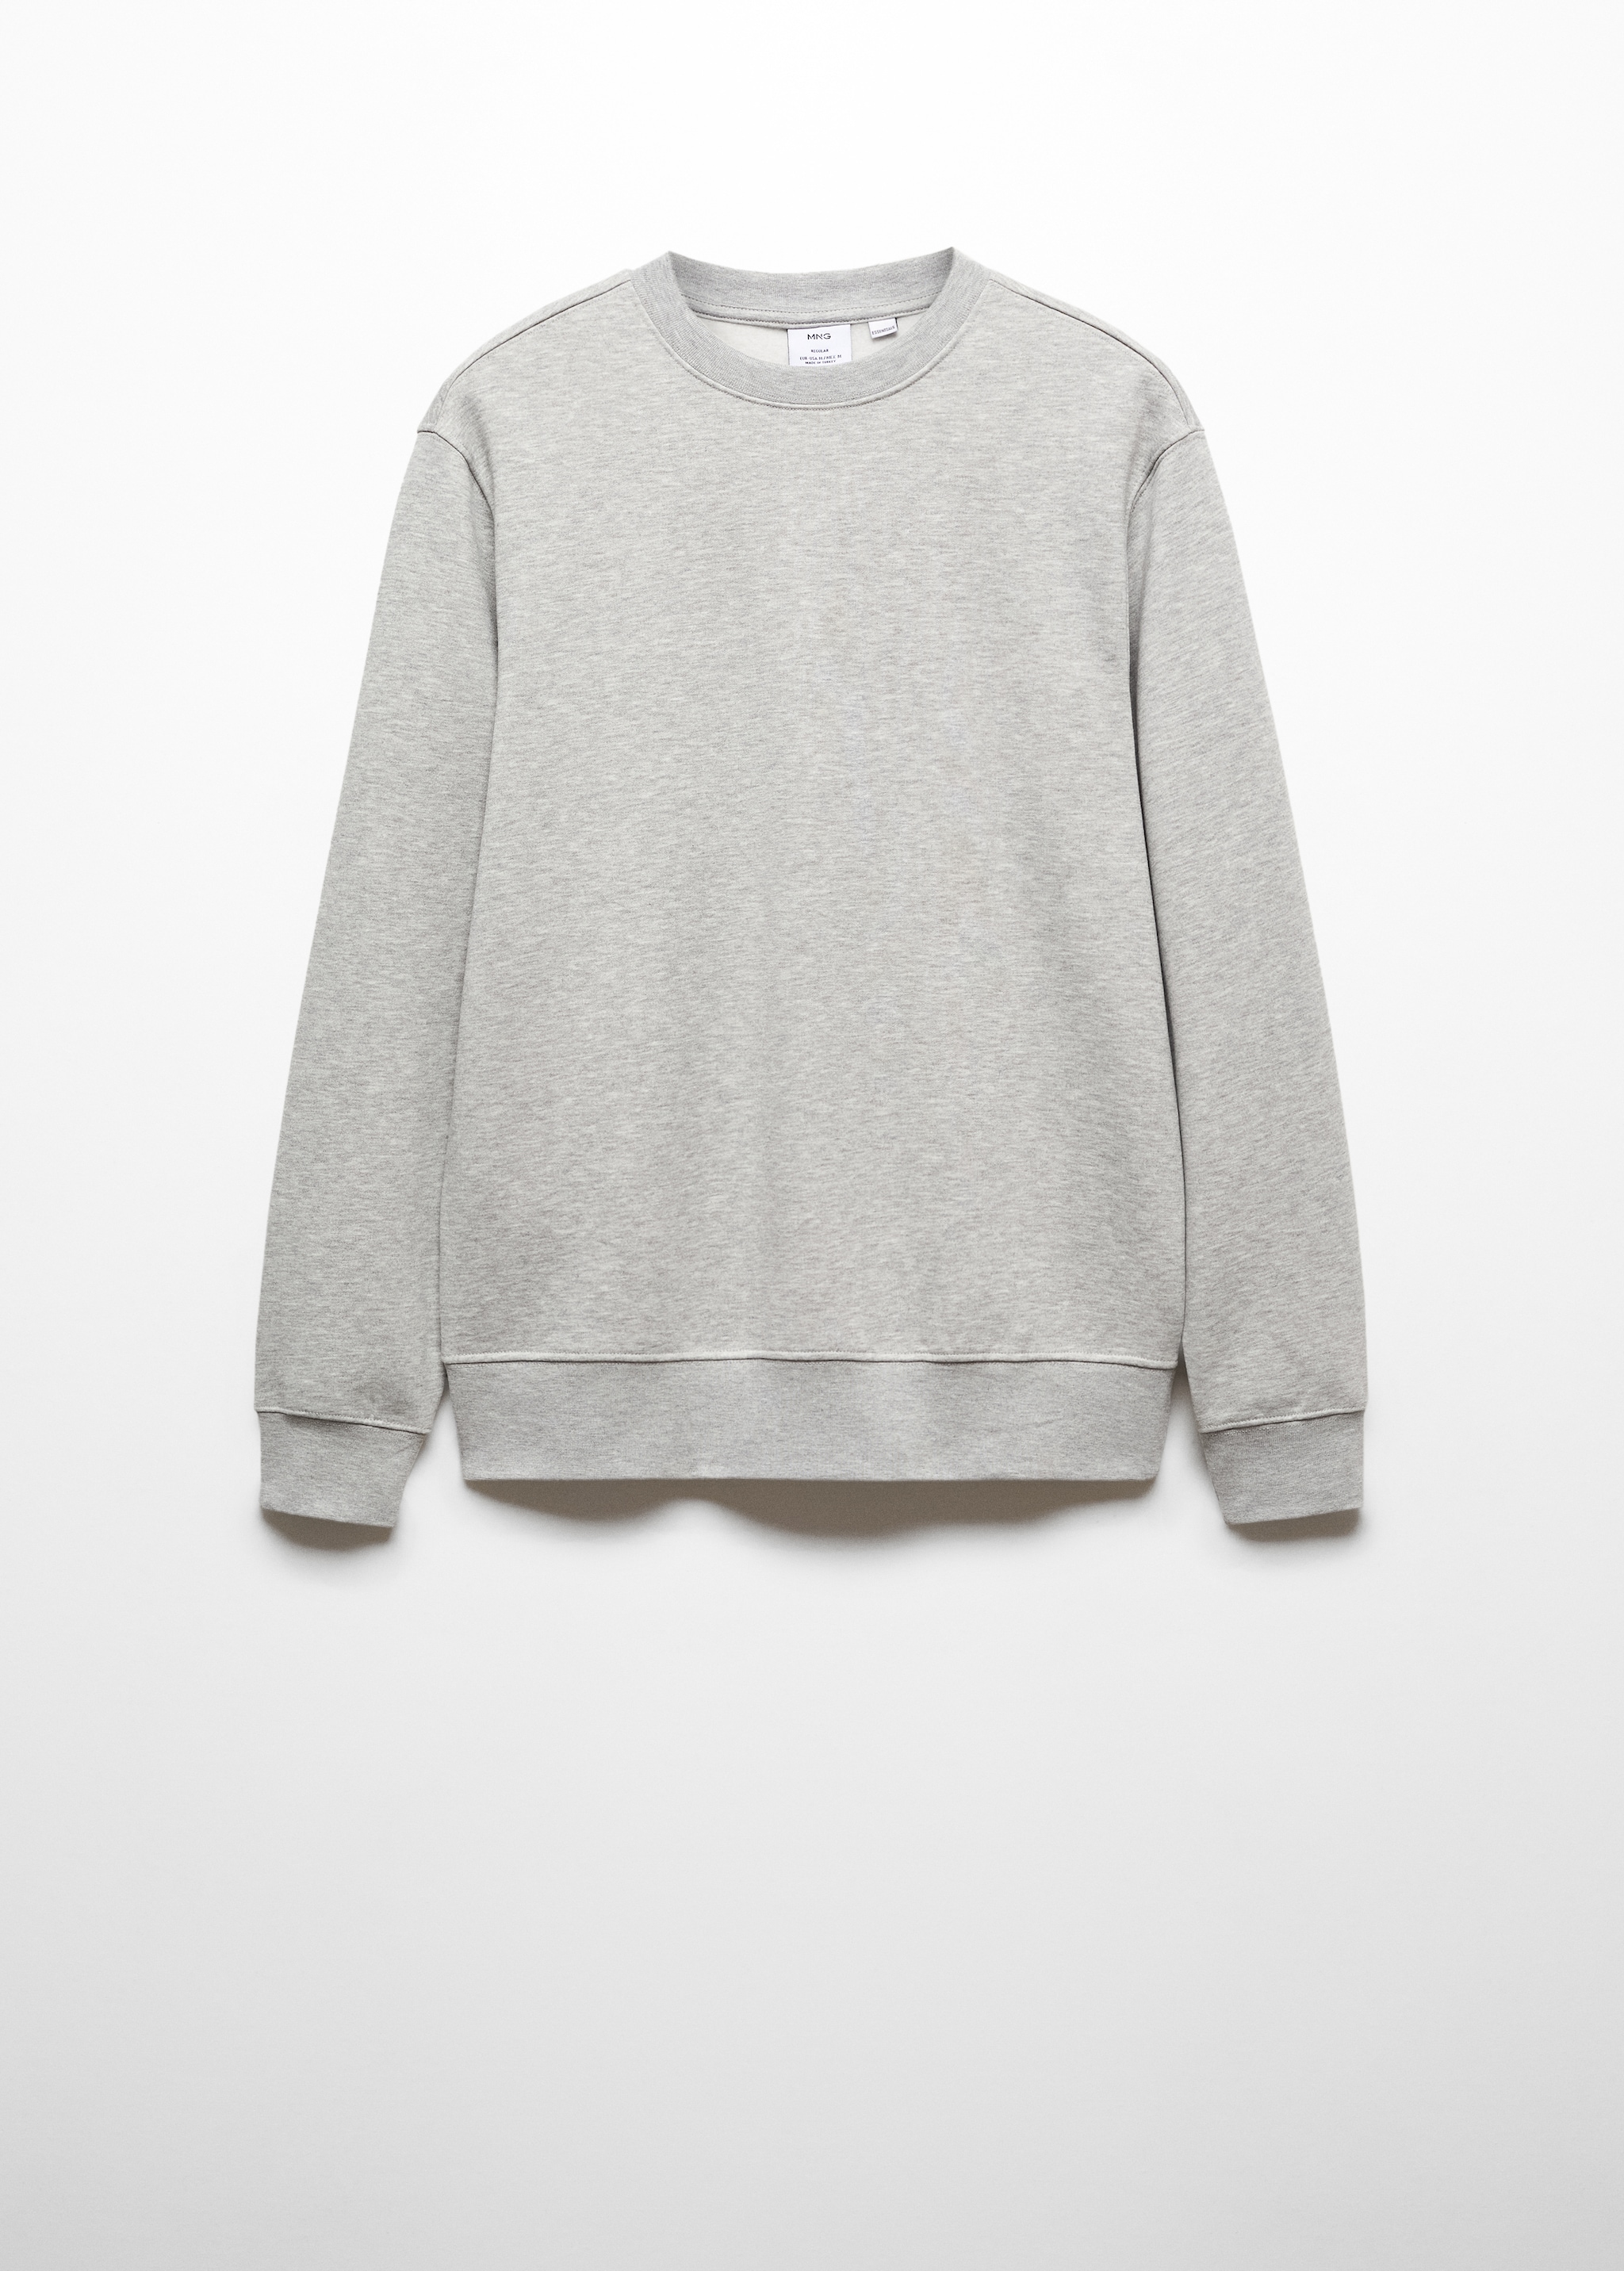 Lightweight cotton sweatshirt - Article without model